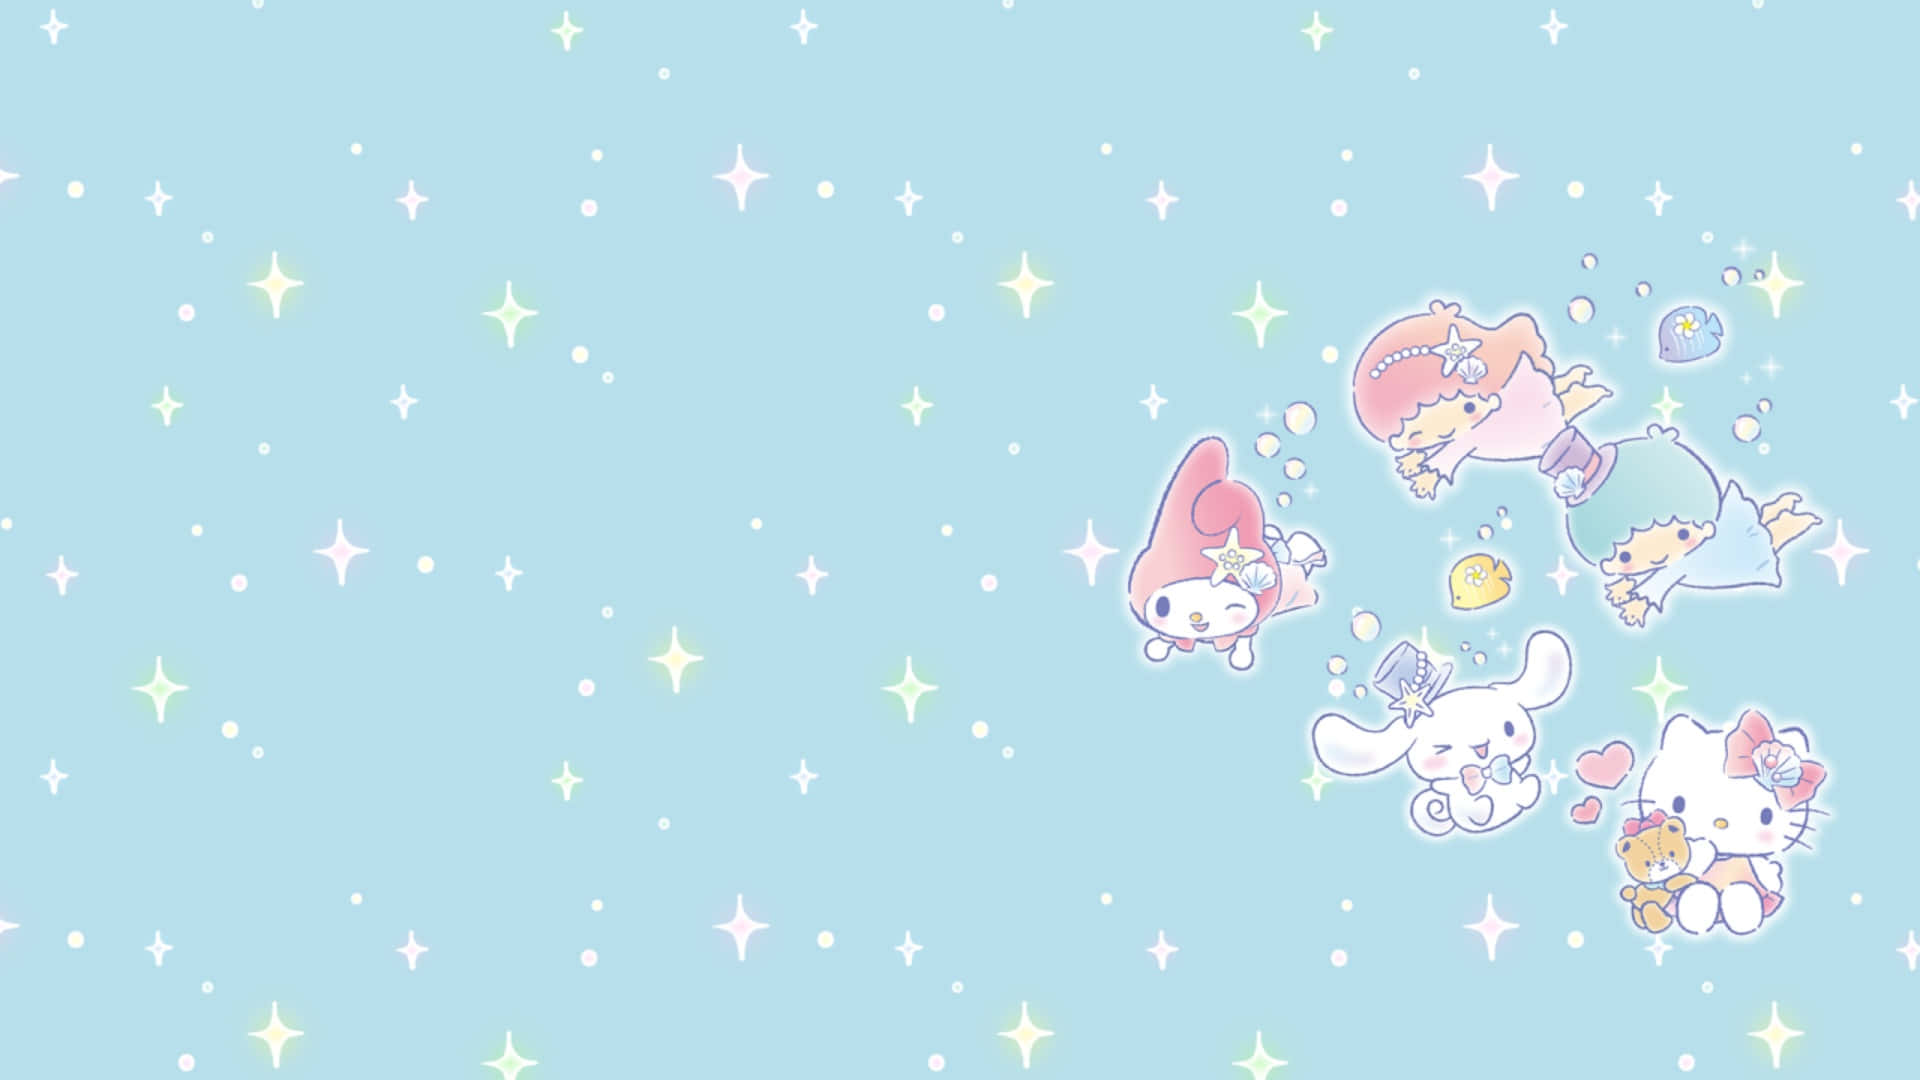 Cinnamoroll's magical laptop lets him explore never-before-seen worlds! Wallpaper